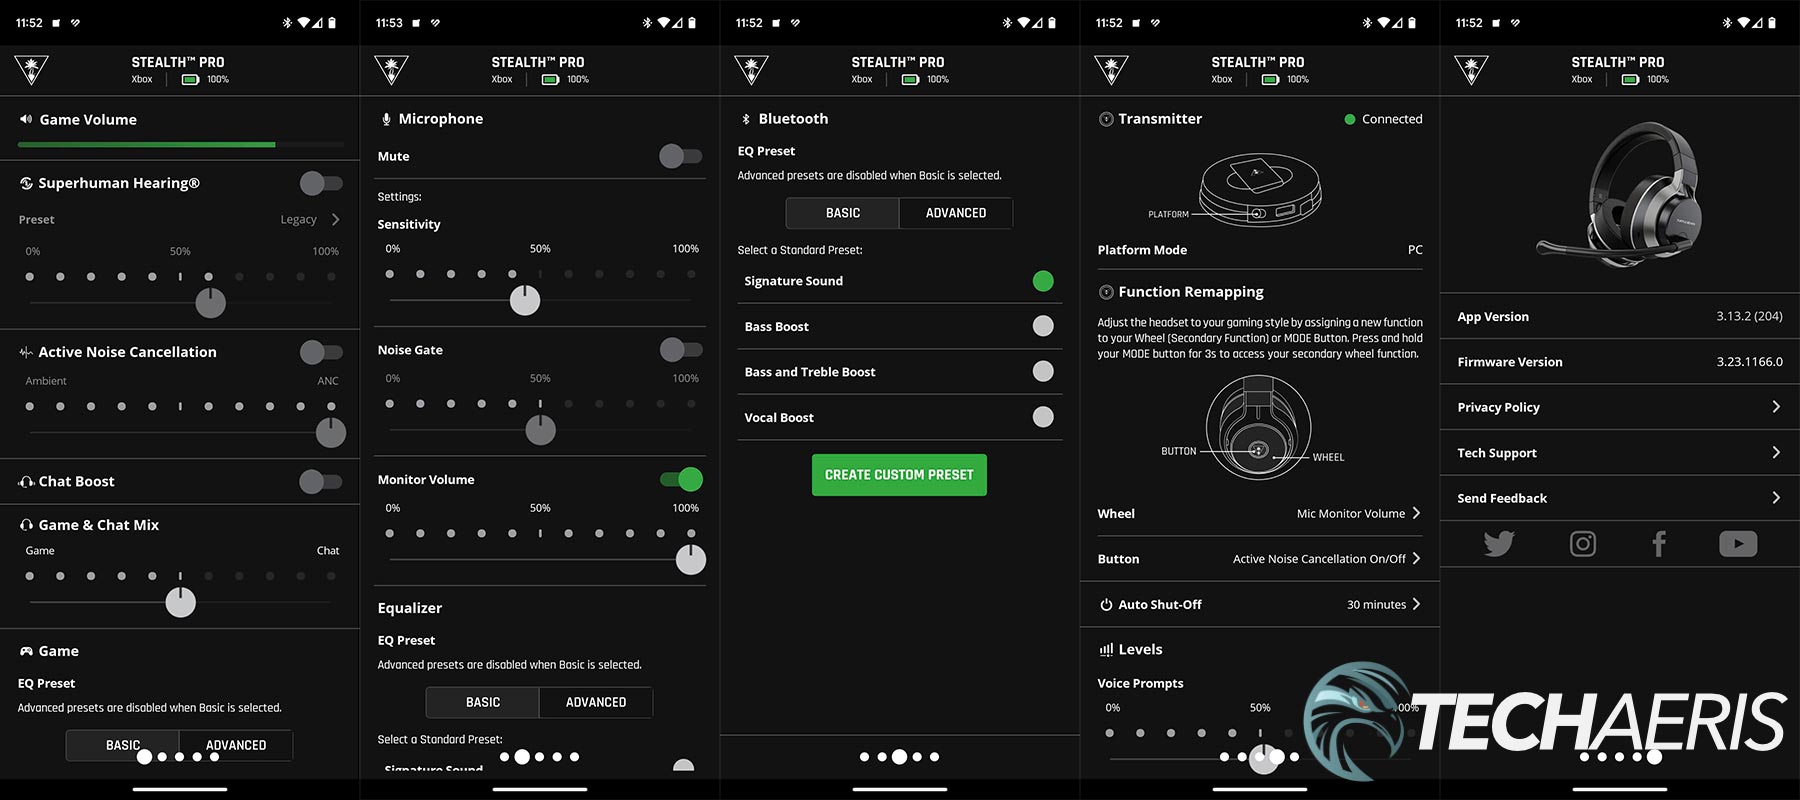 Screenshots from the Turtle Beach Audio Hub Android app